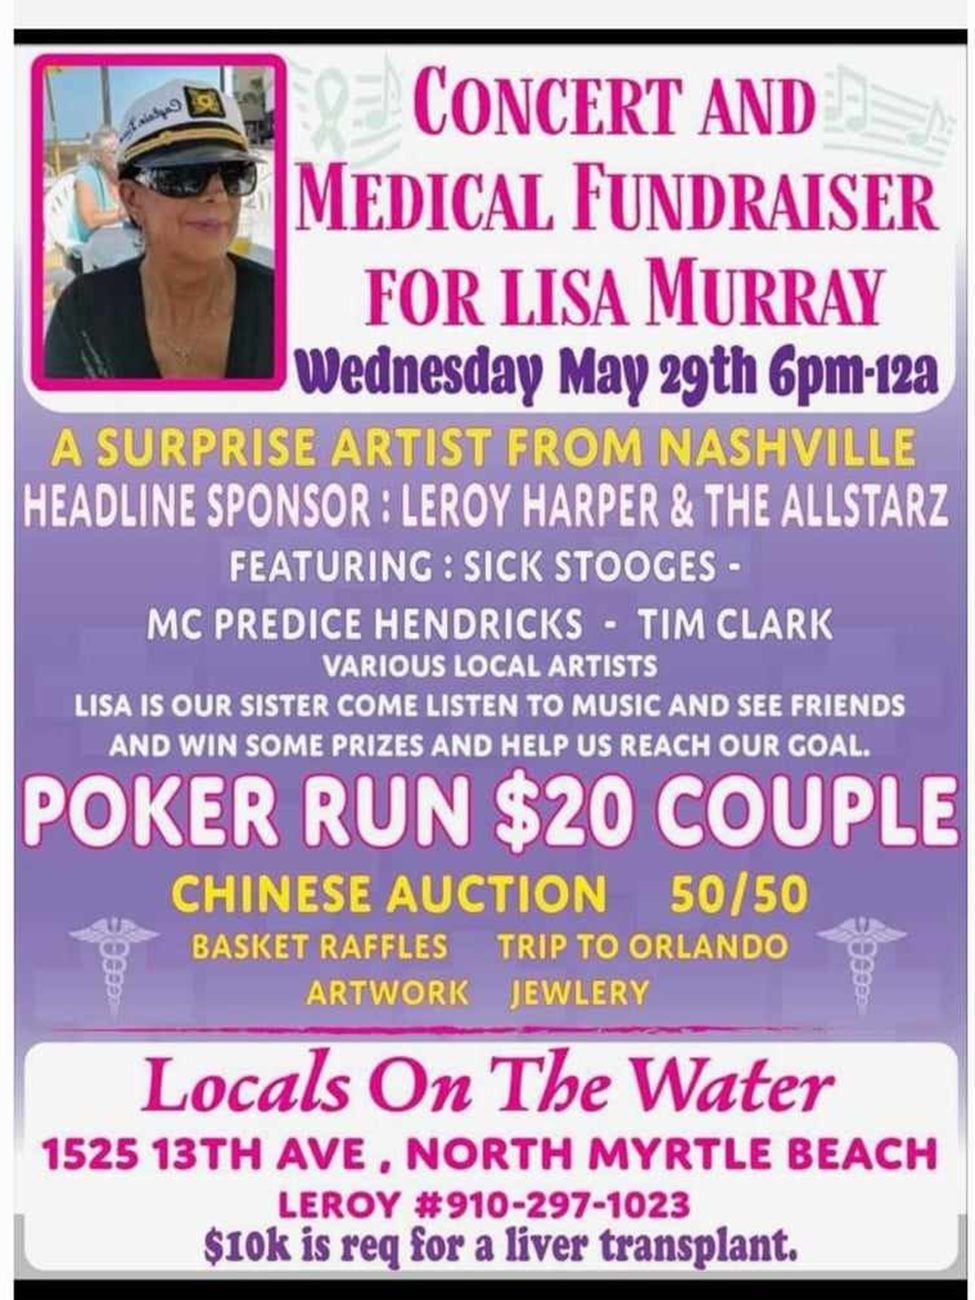 Concert and Medical Fundraiser for Lisa Murray